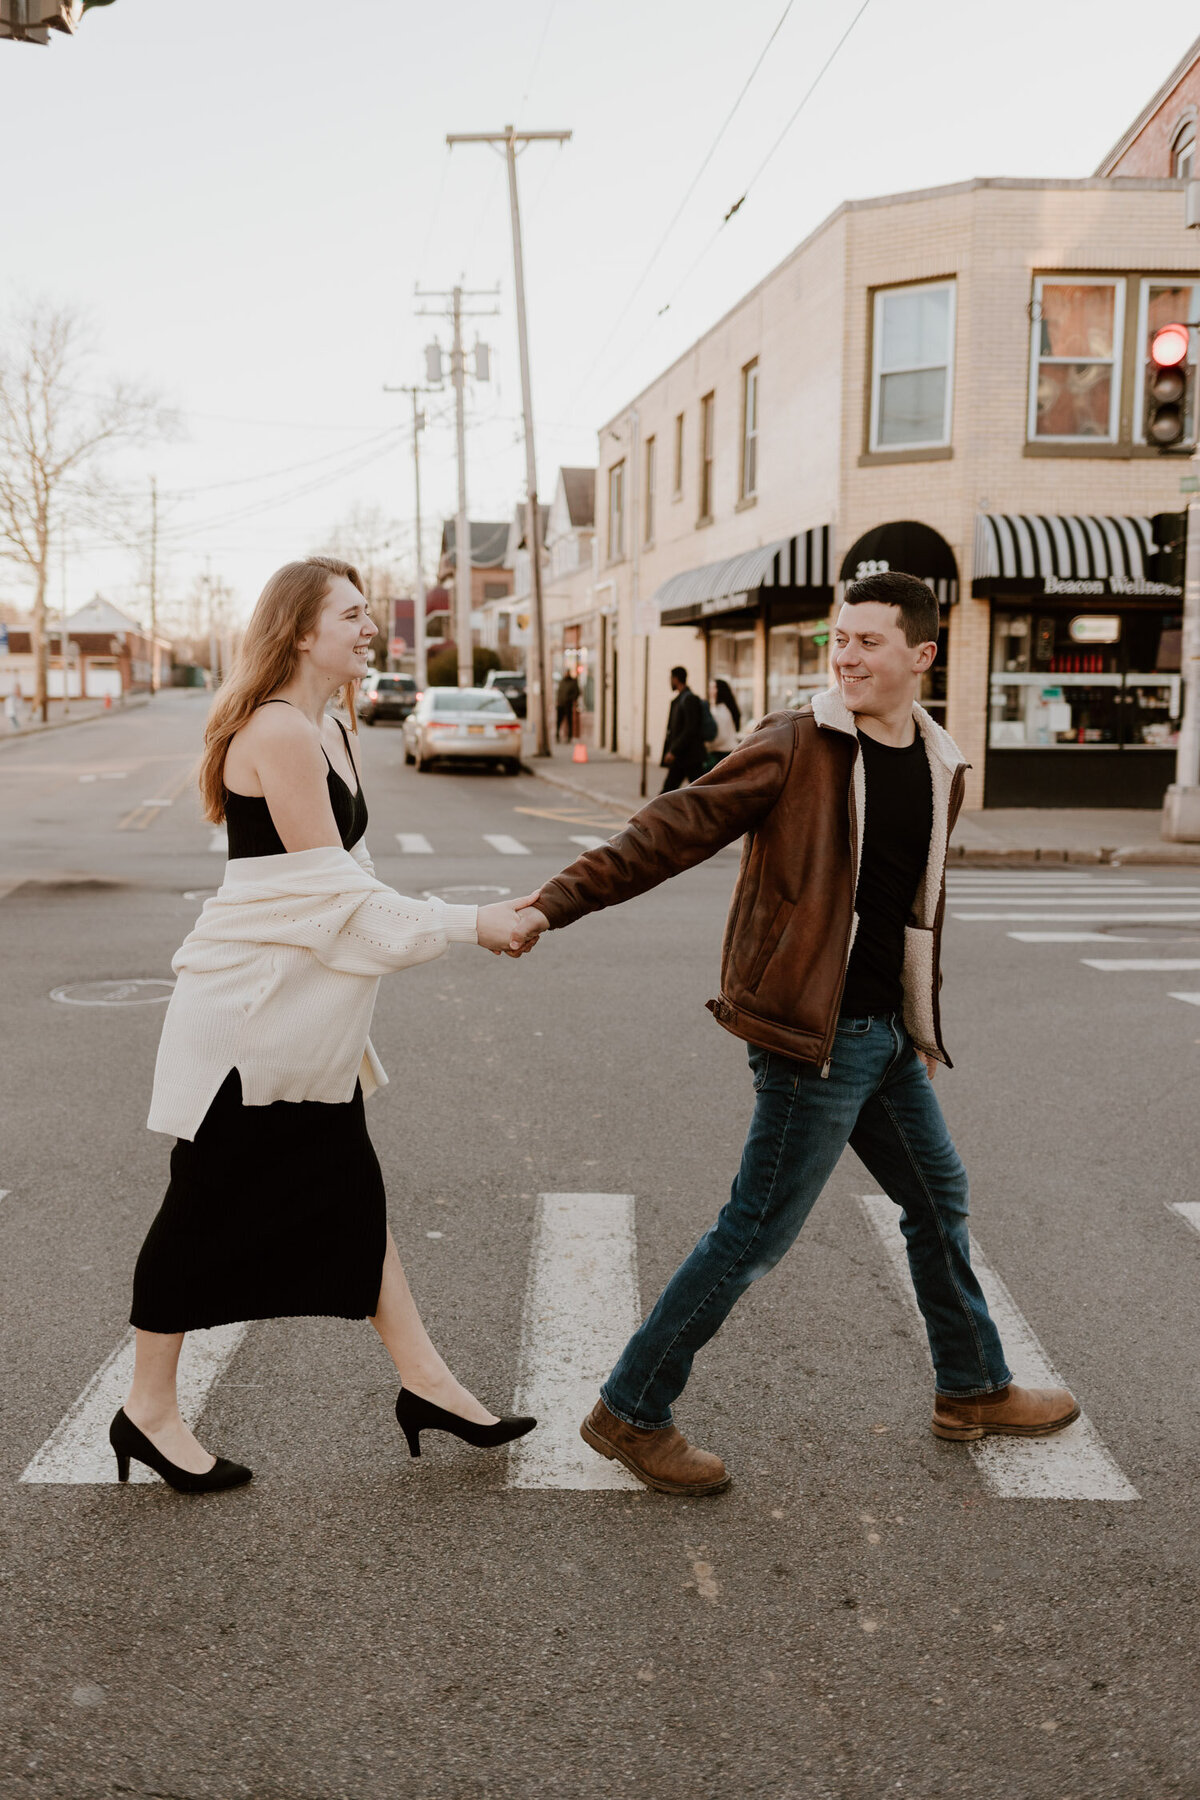 Engaged couple holding hands and crossing the street in Beacon, NY, sharing a playful moment during their engagement photo session.